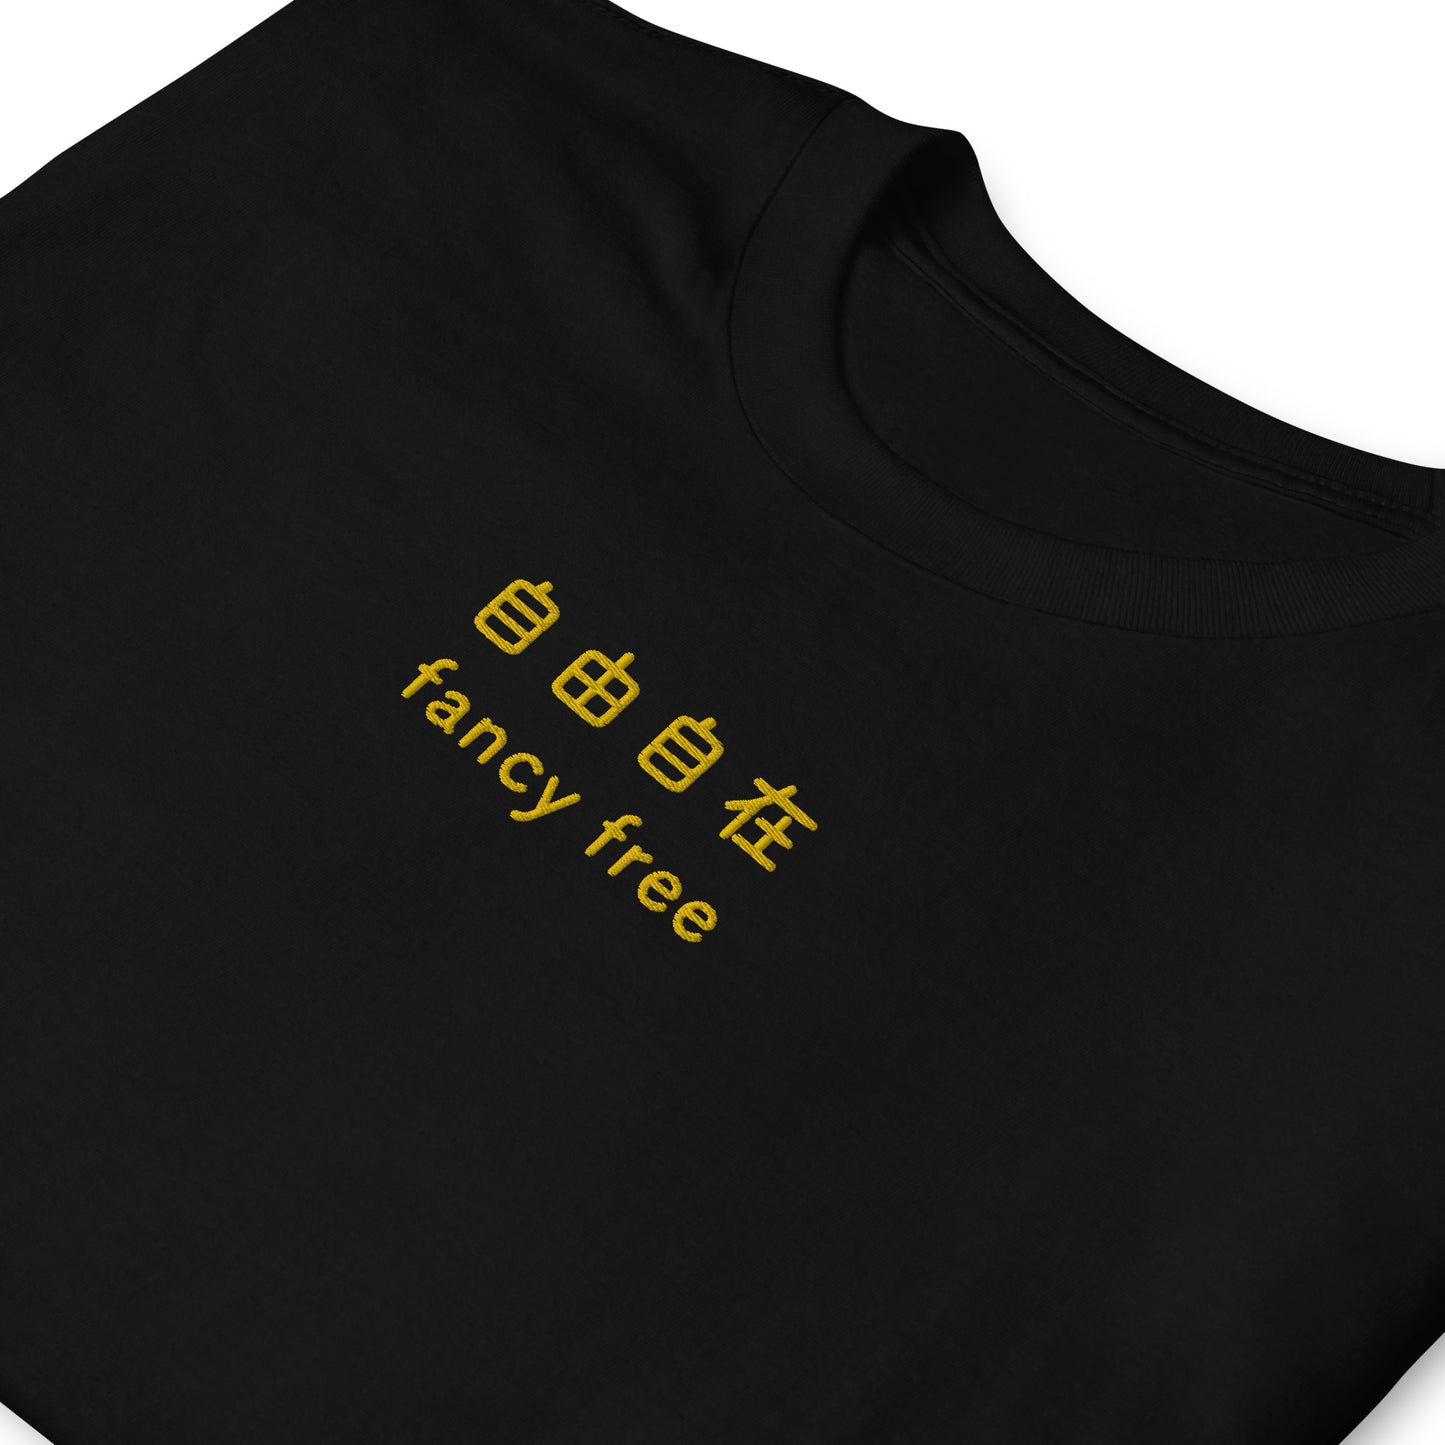 Black High Quality Tee - Front Design with an Yellow Embroidery "Fancy Free" in Japanese,Chinese and English